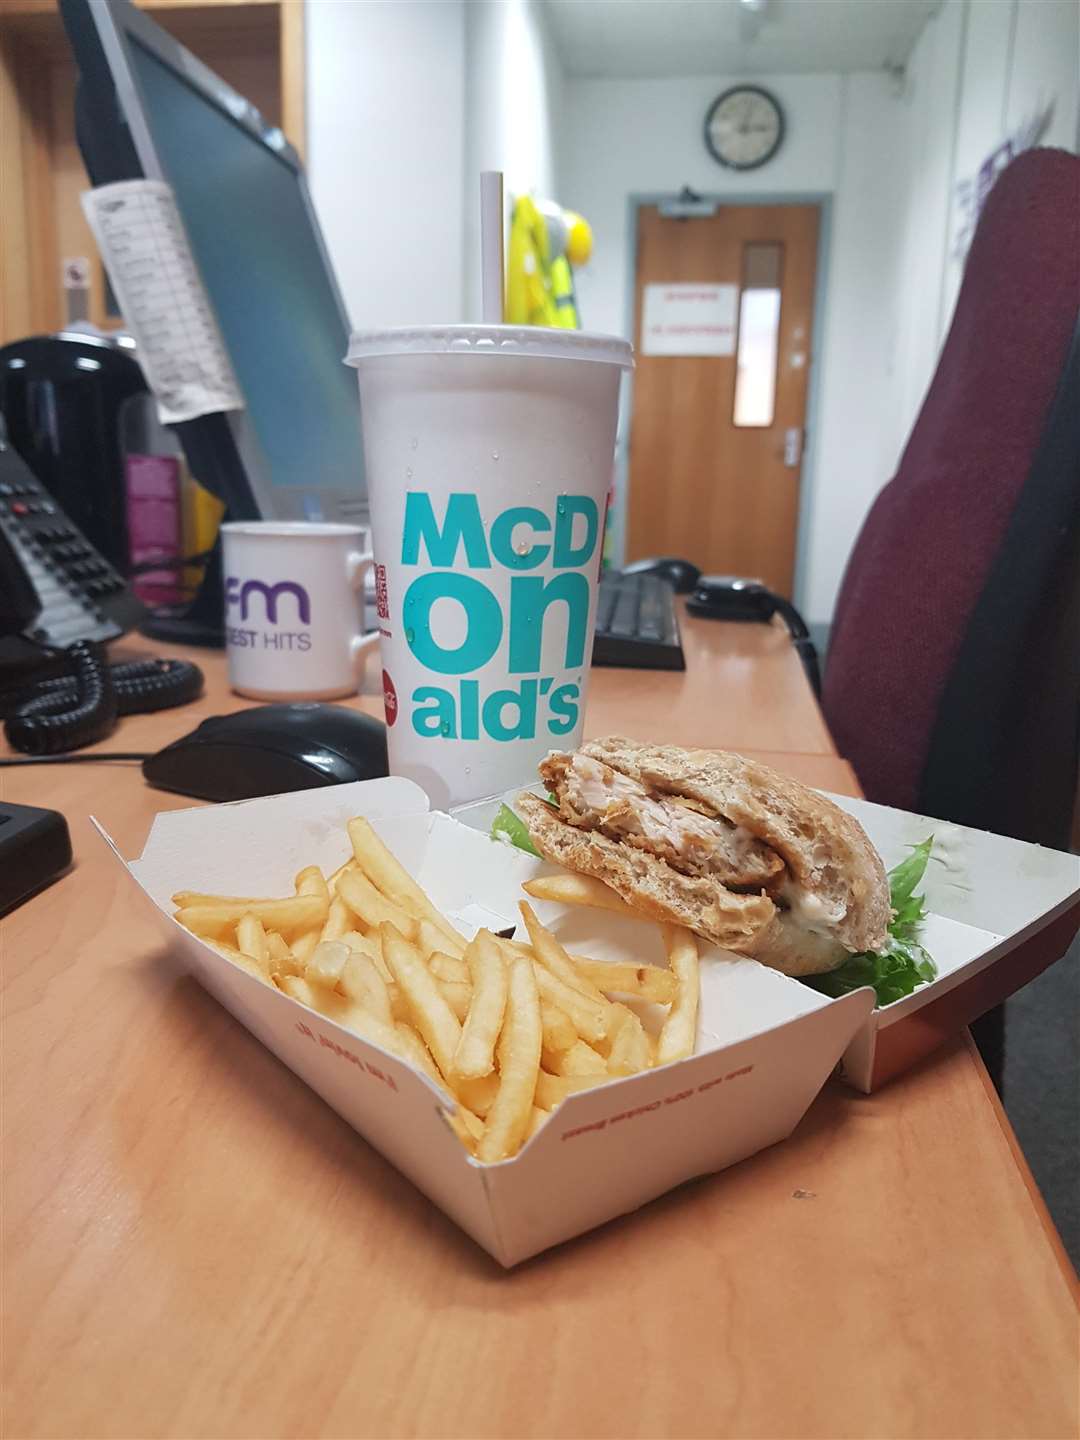 Uber Eats' first takeaway delivery in Medway was a chicken legend meal and a strawberry milkshake